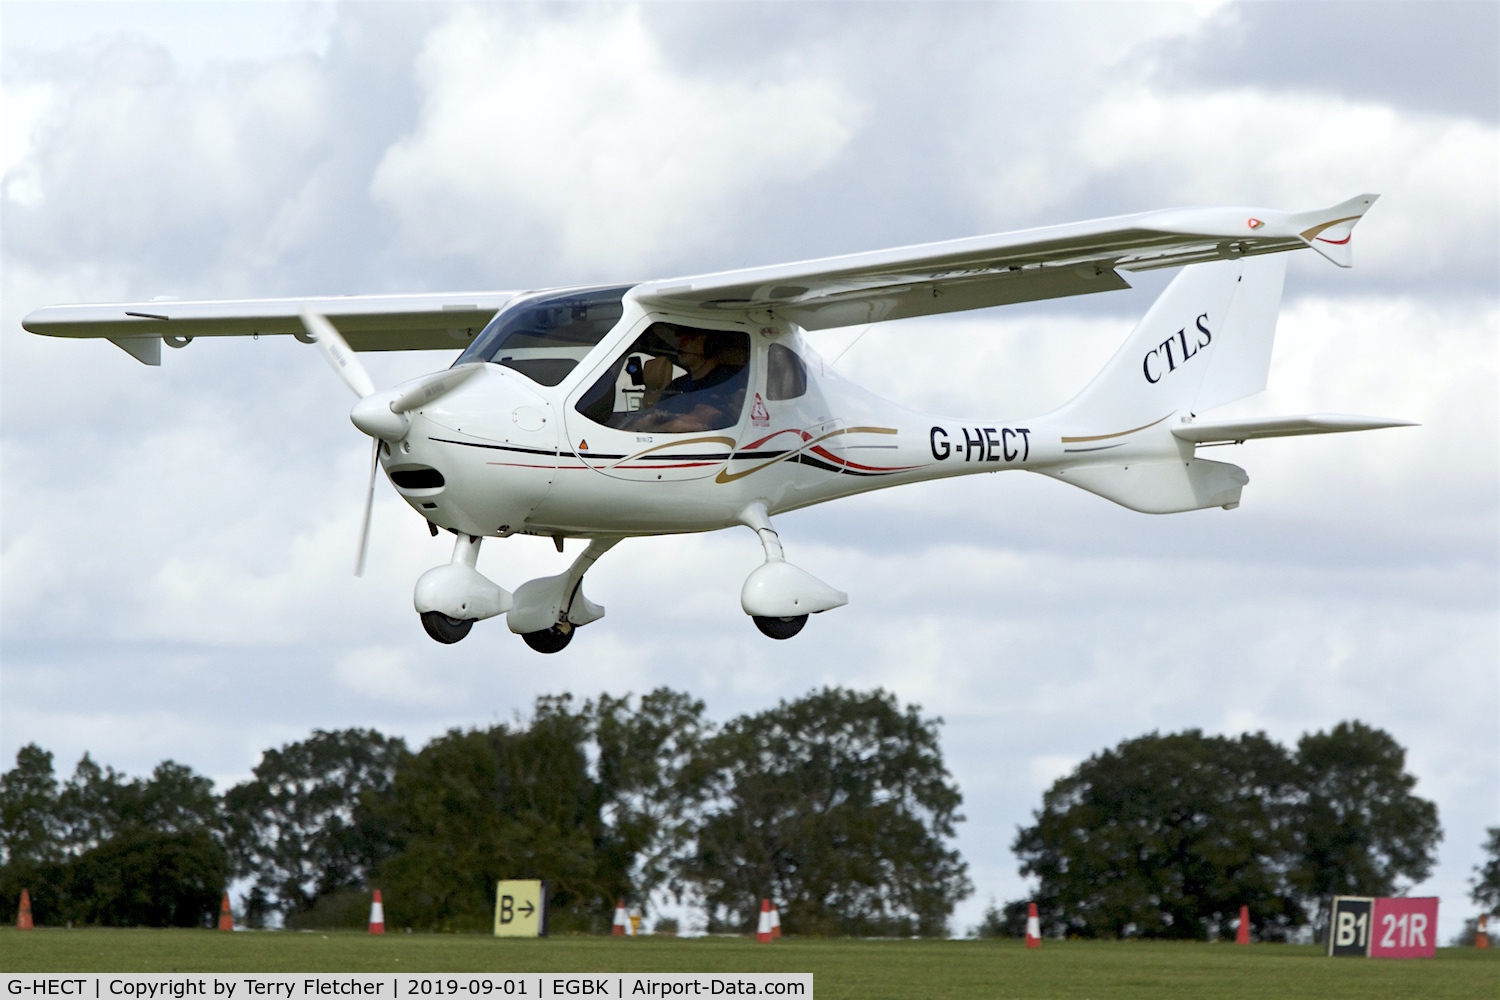 G-HECT, 2009 Flight Design CTLS C/N F-09-04-06, At Sywell